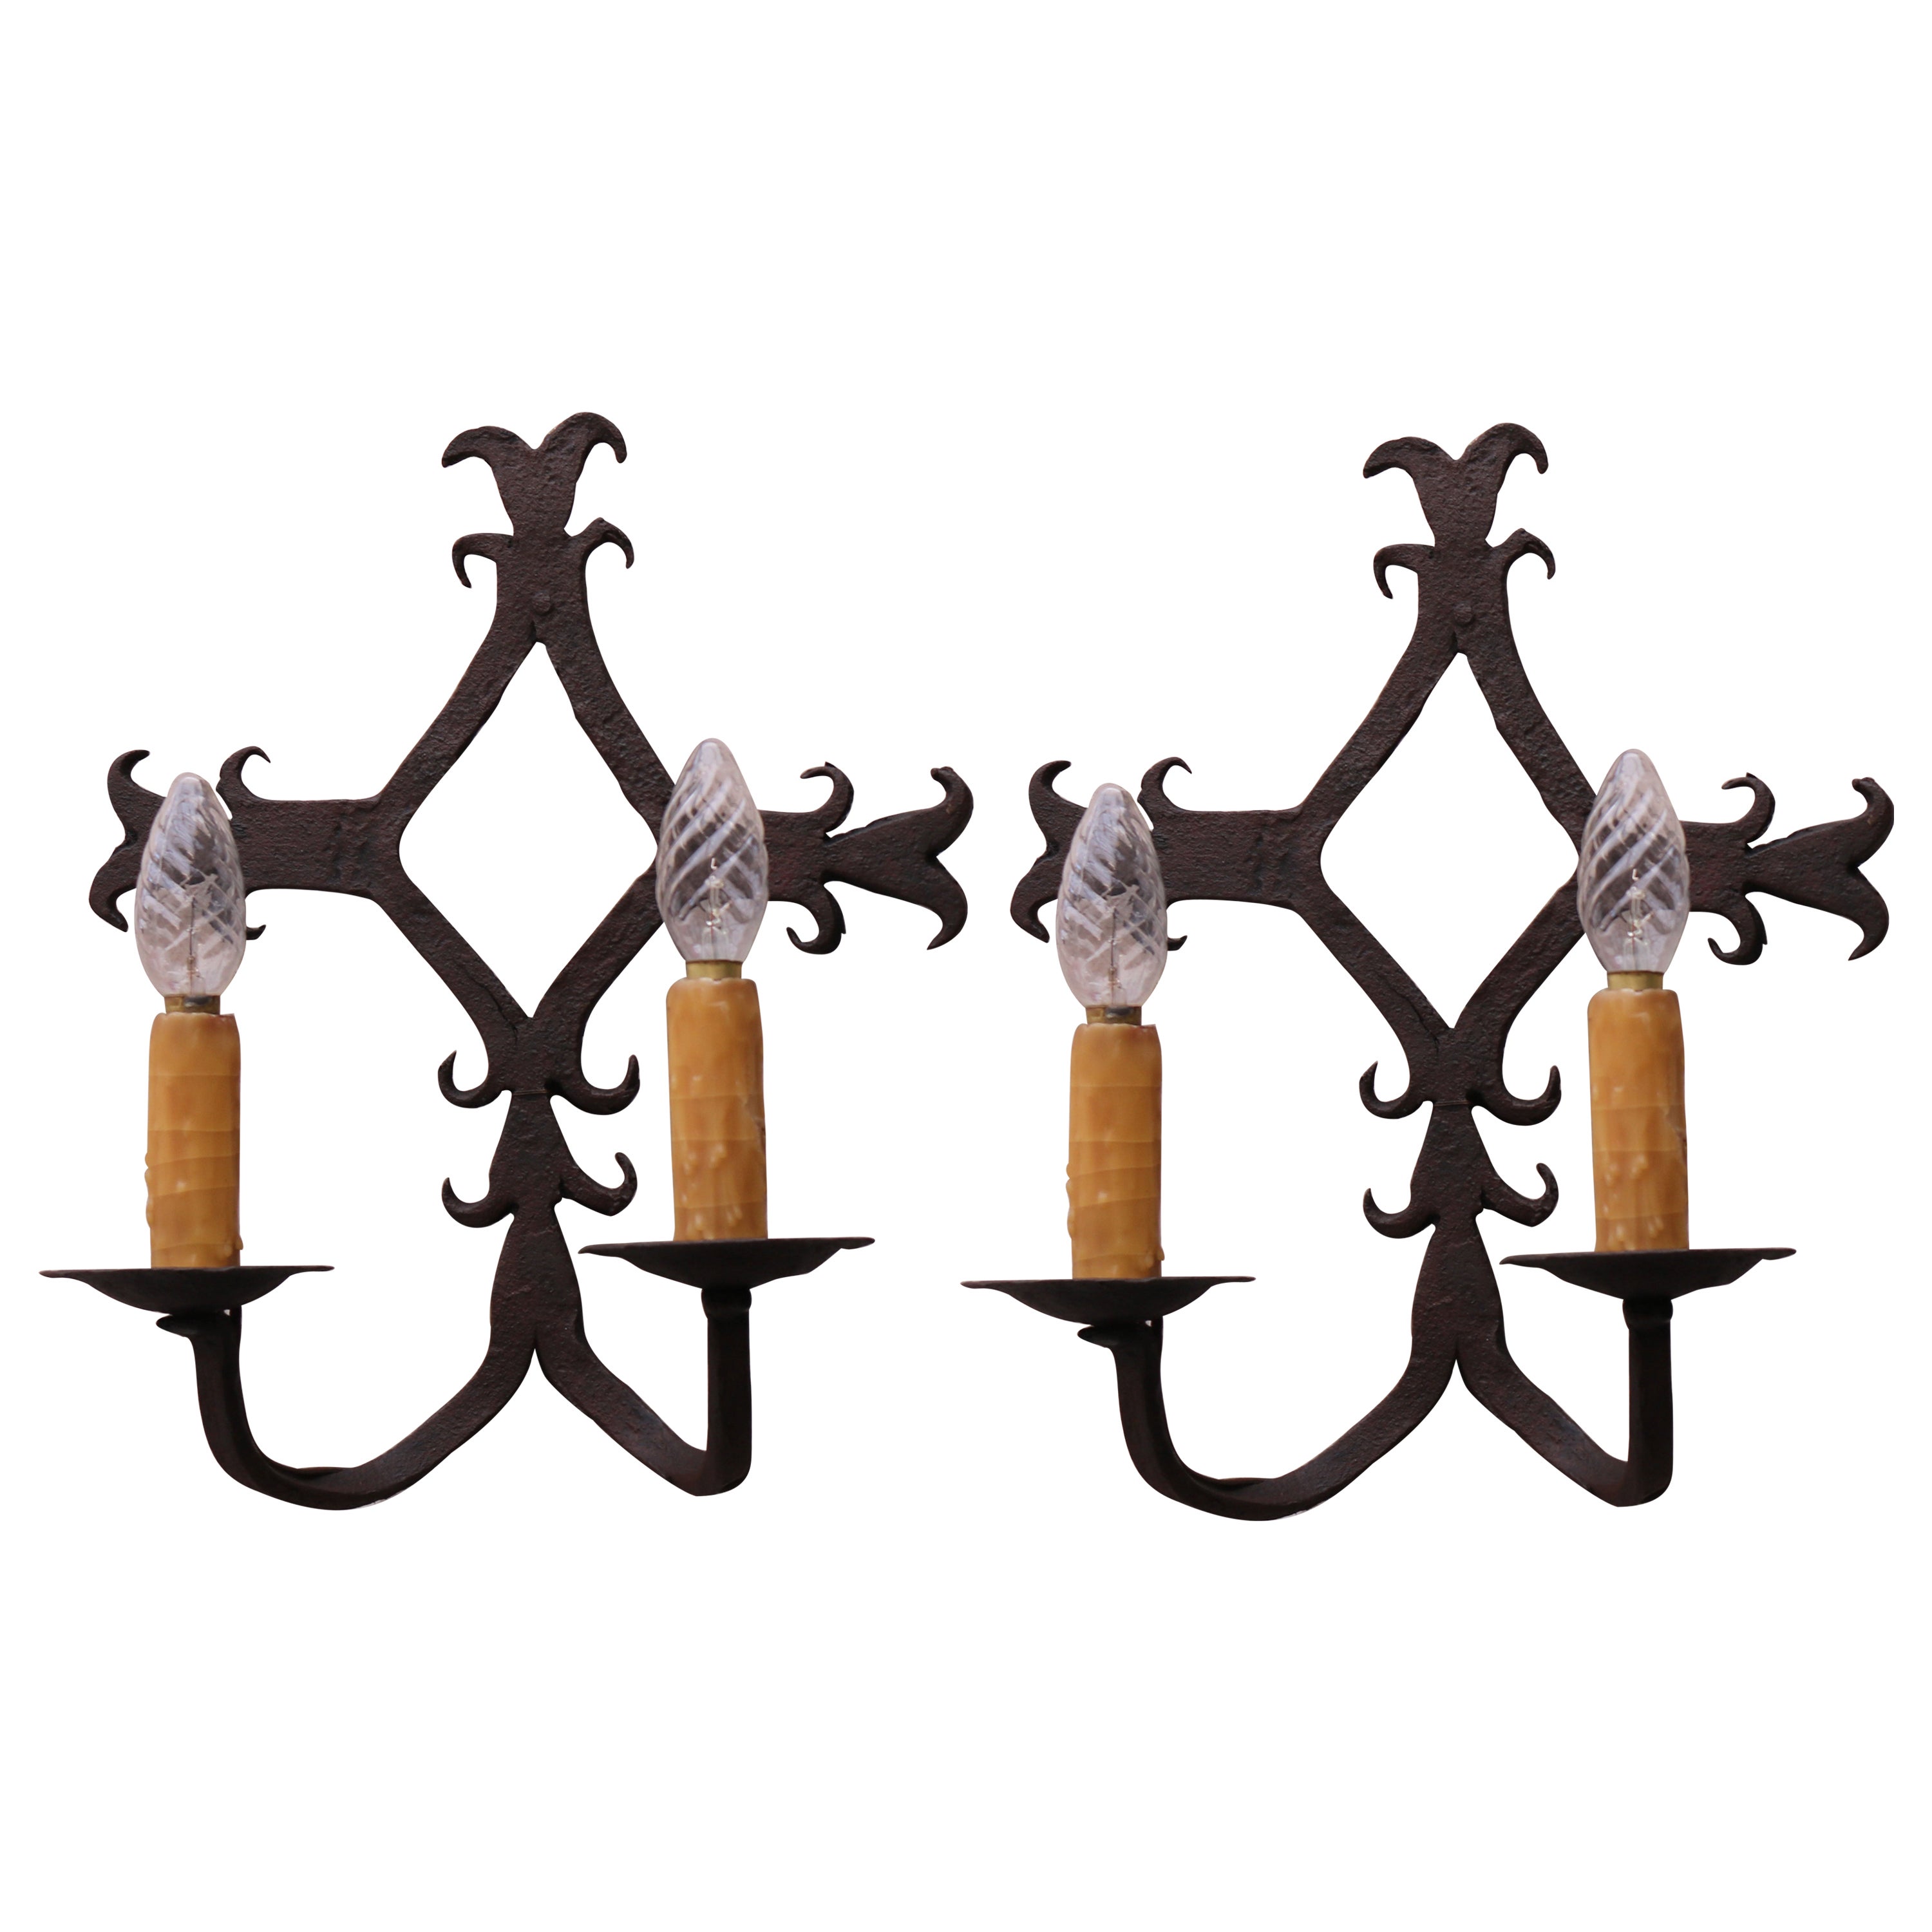 Antique French Wrought Iron Wall Lights / Sconces Spanish Style 1900 Arts Crafts For Sale